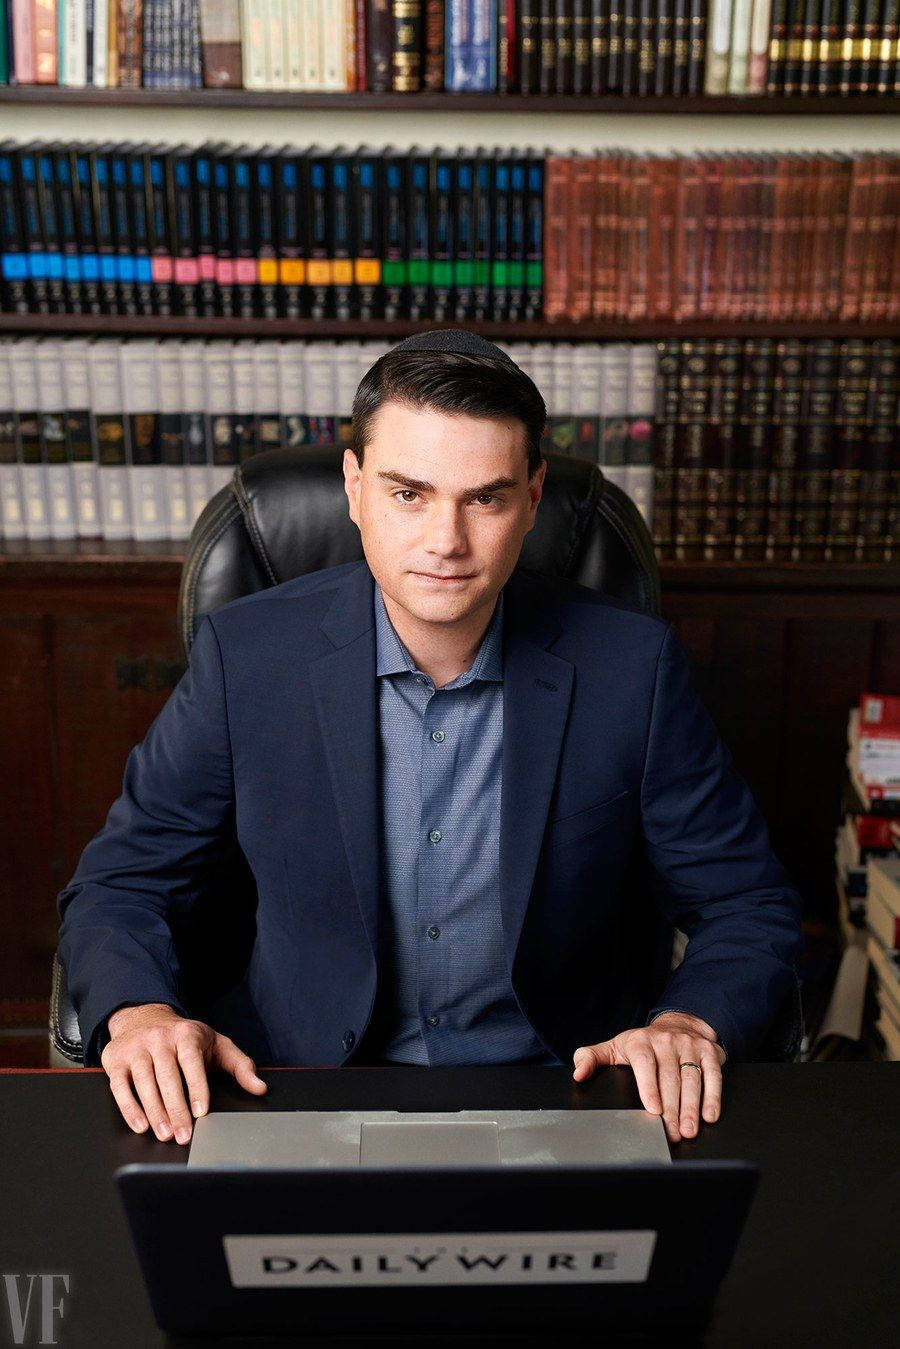 Ben Shapiro The Daily Wire Founder